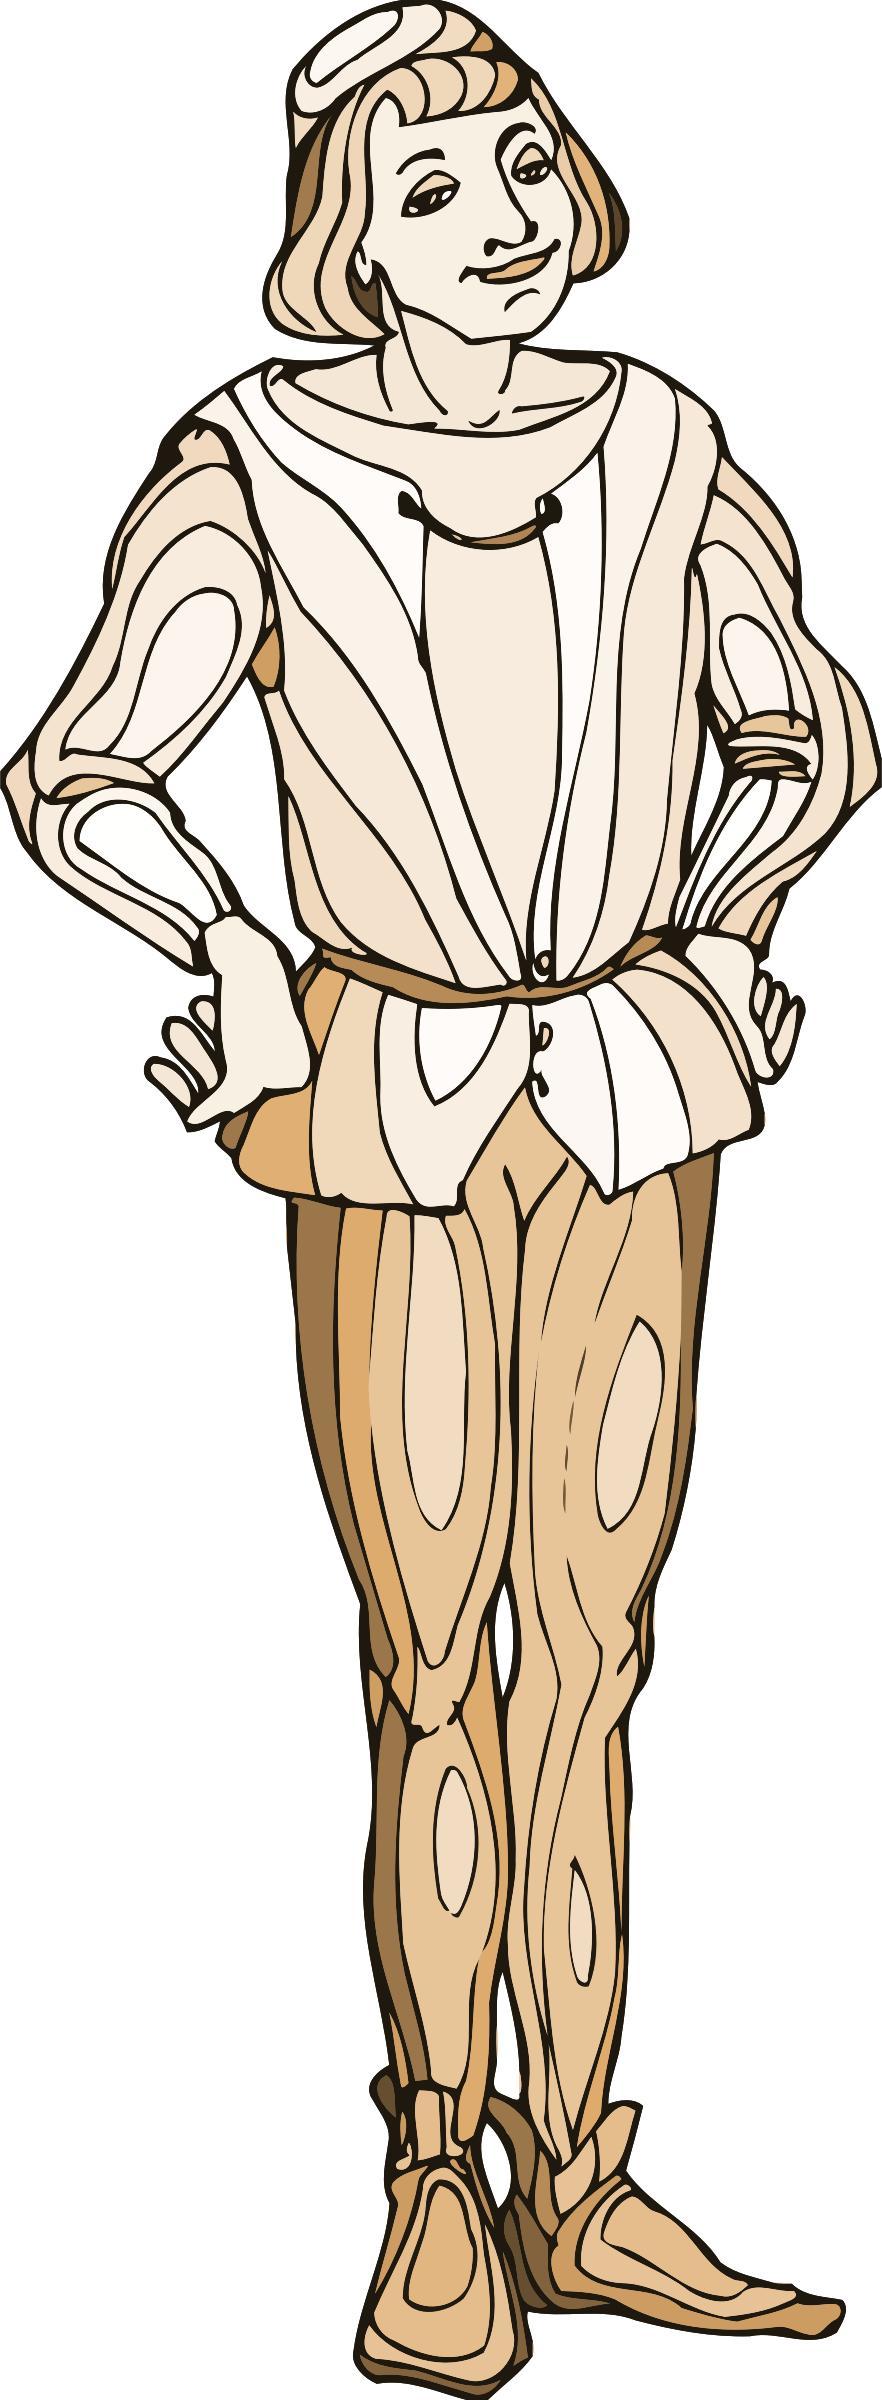 Shakespeare characters - Sampson png transparent